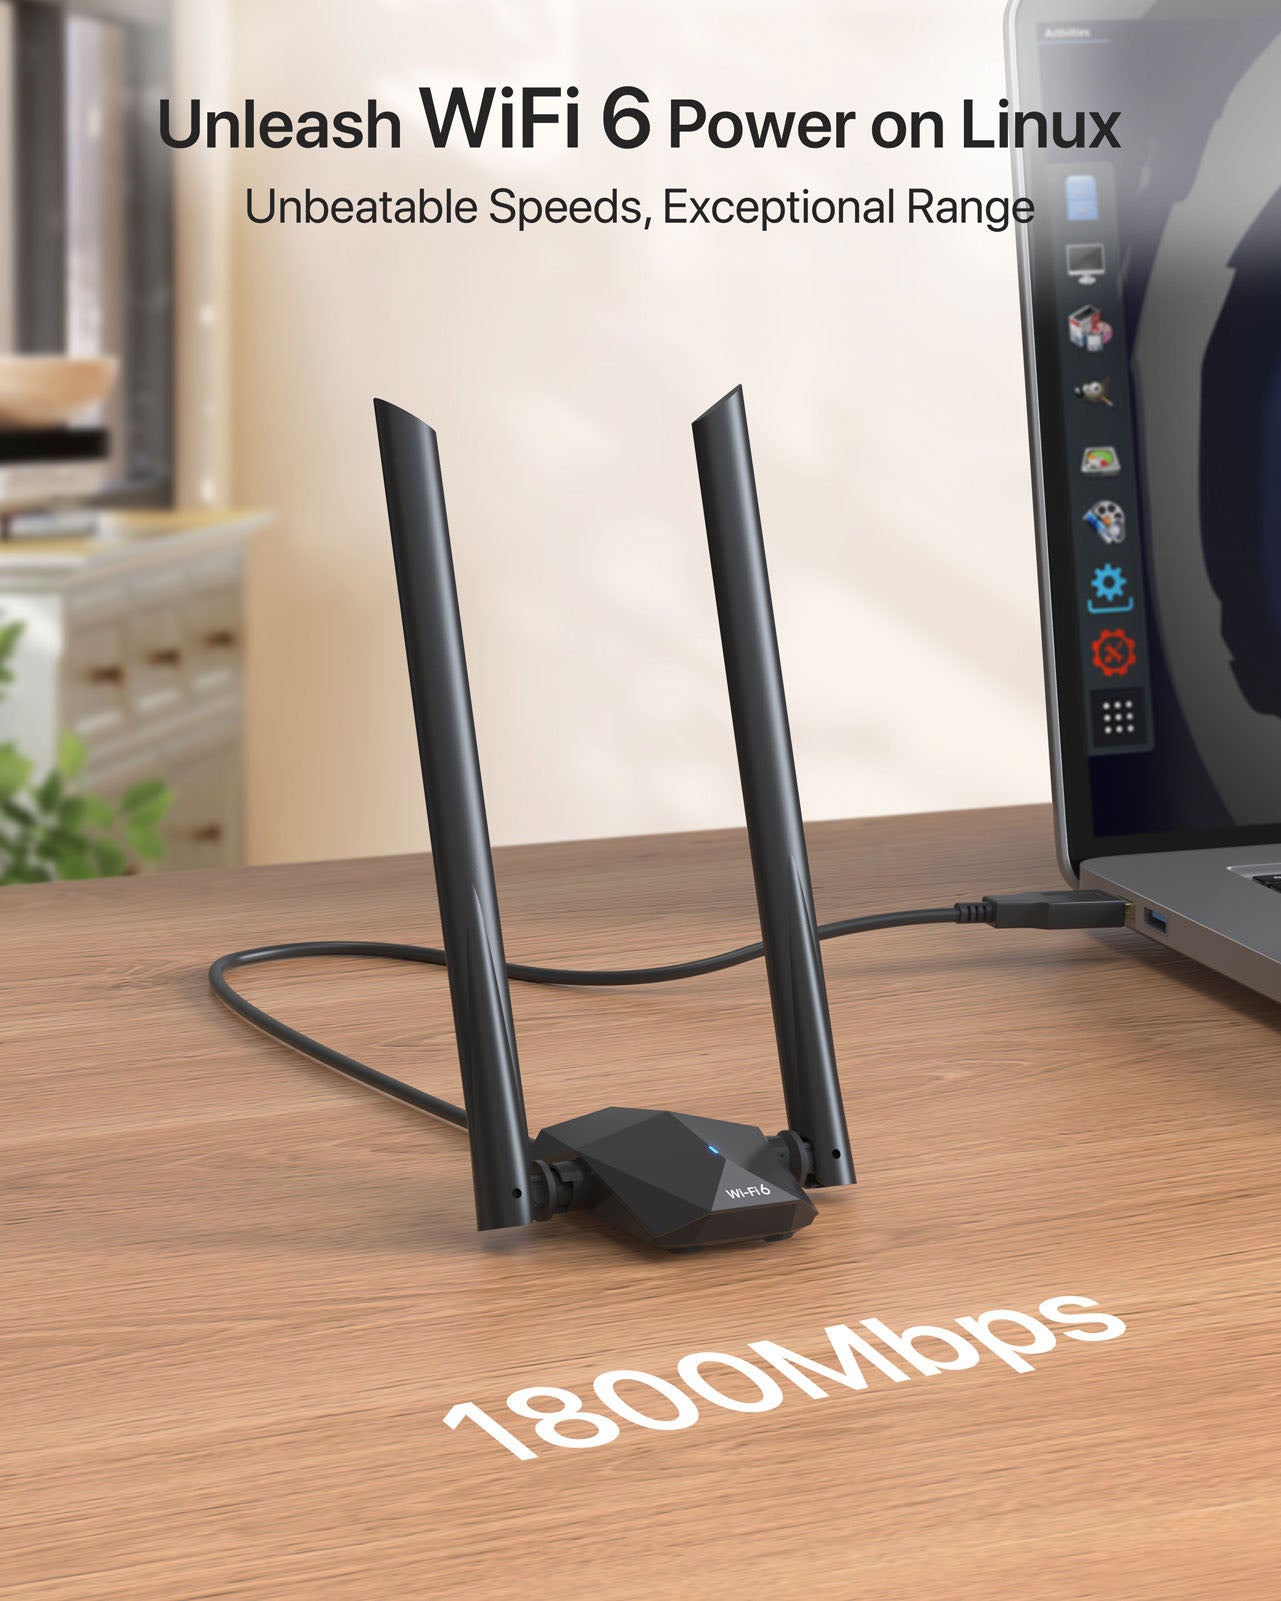 1800Mbps Linux Compatible WiFi 6 USB Adapter Boosts 1800Mbps WiFi Speeds and WiFi Range Better Than Other USB WiFi Adapters of Previous Standard